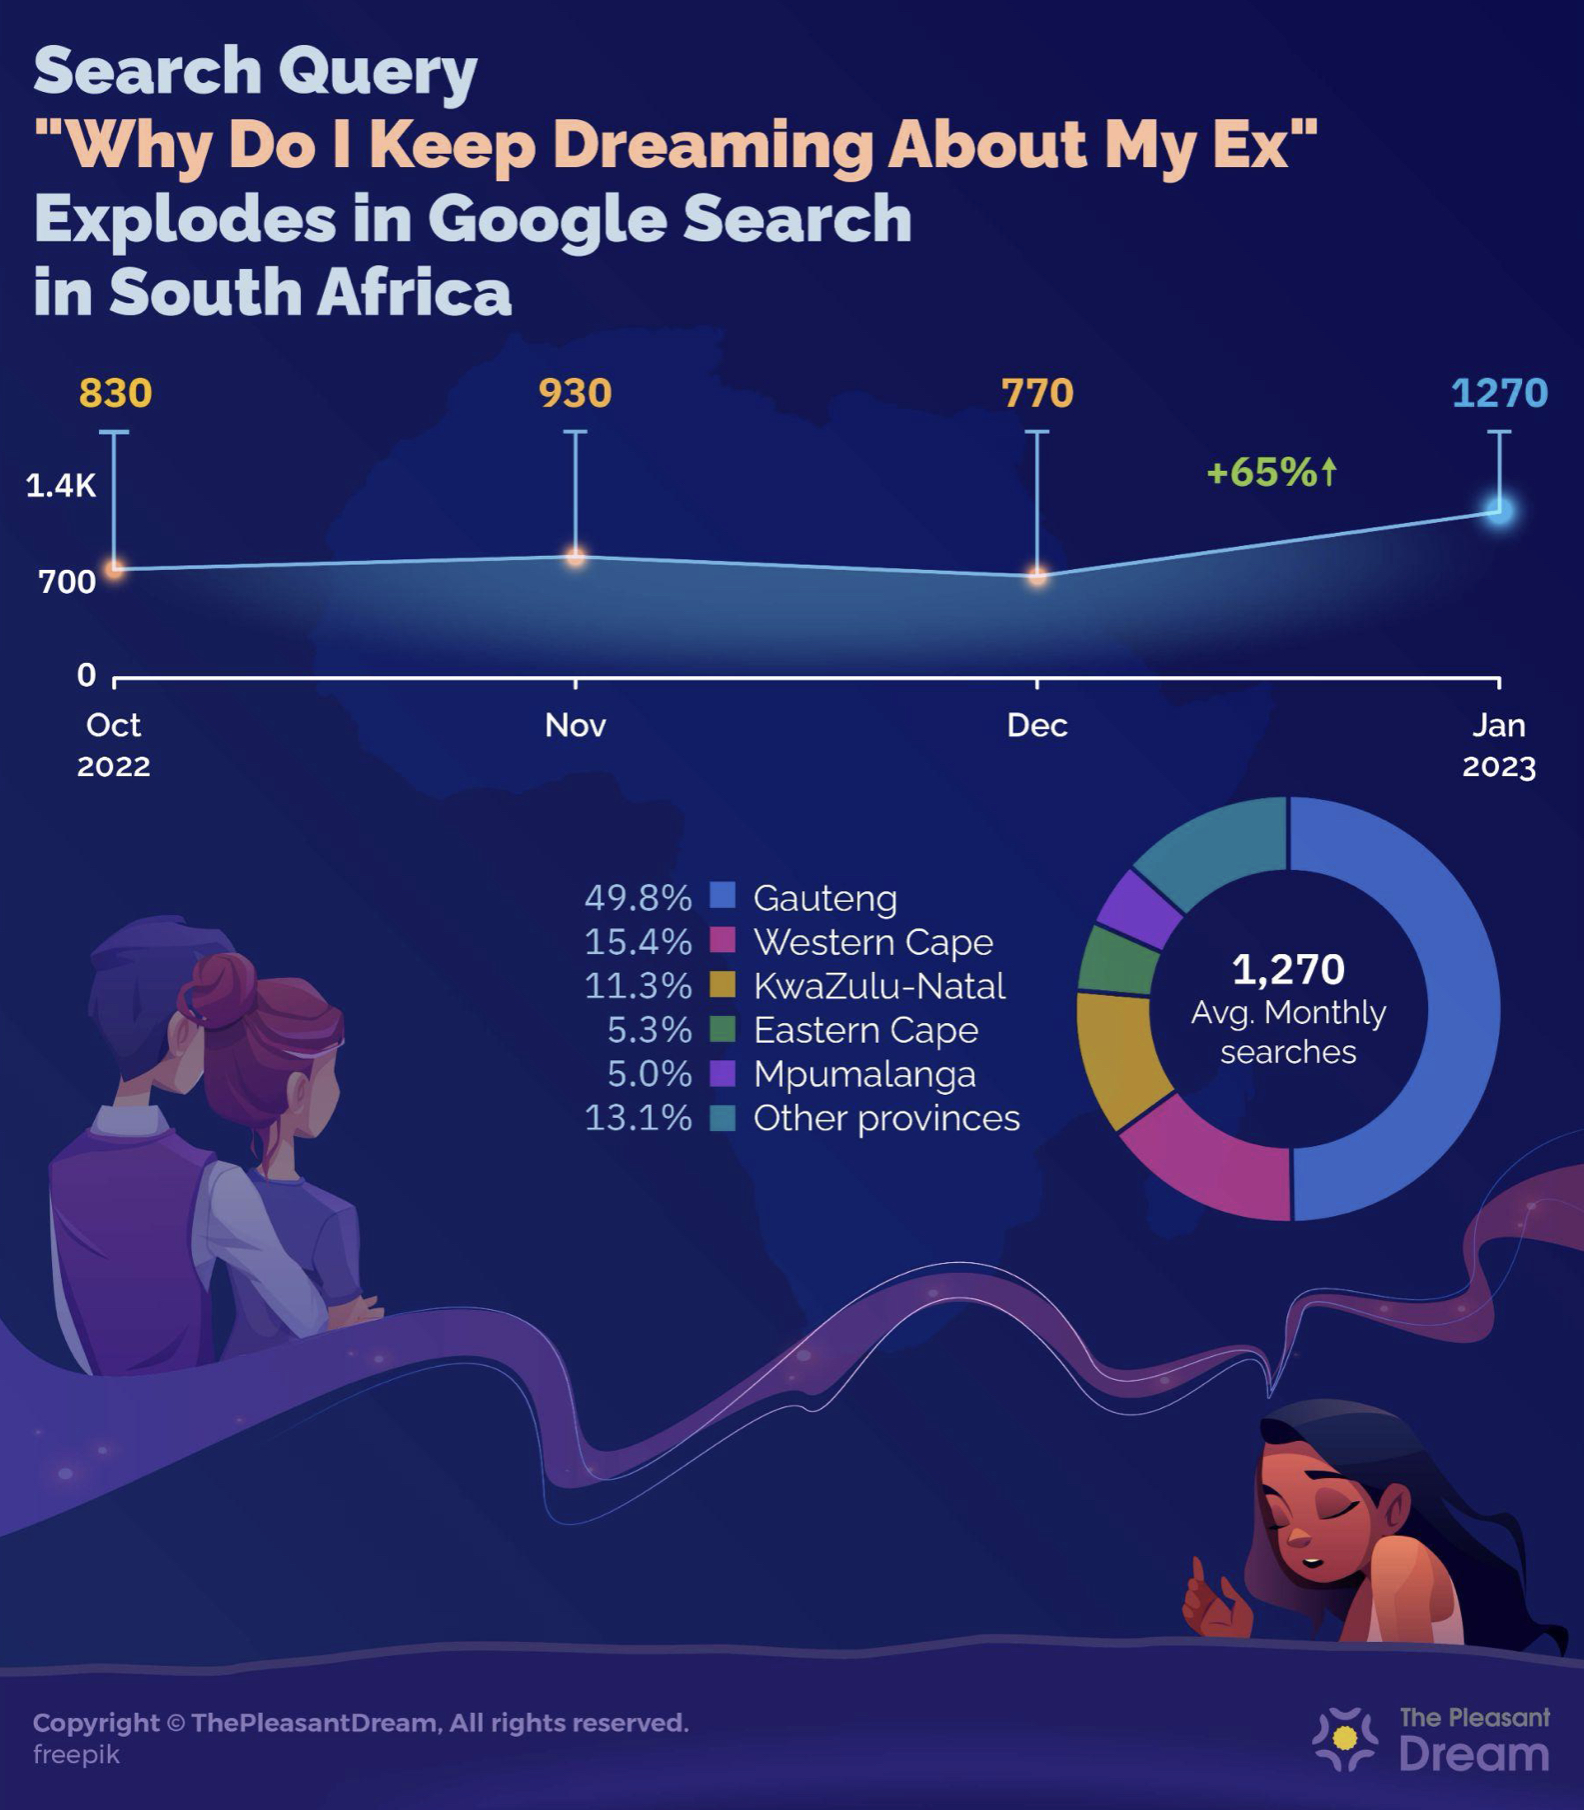 "Why Do I Keep Dreaming About My Ex" Explodes On Google Search!